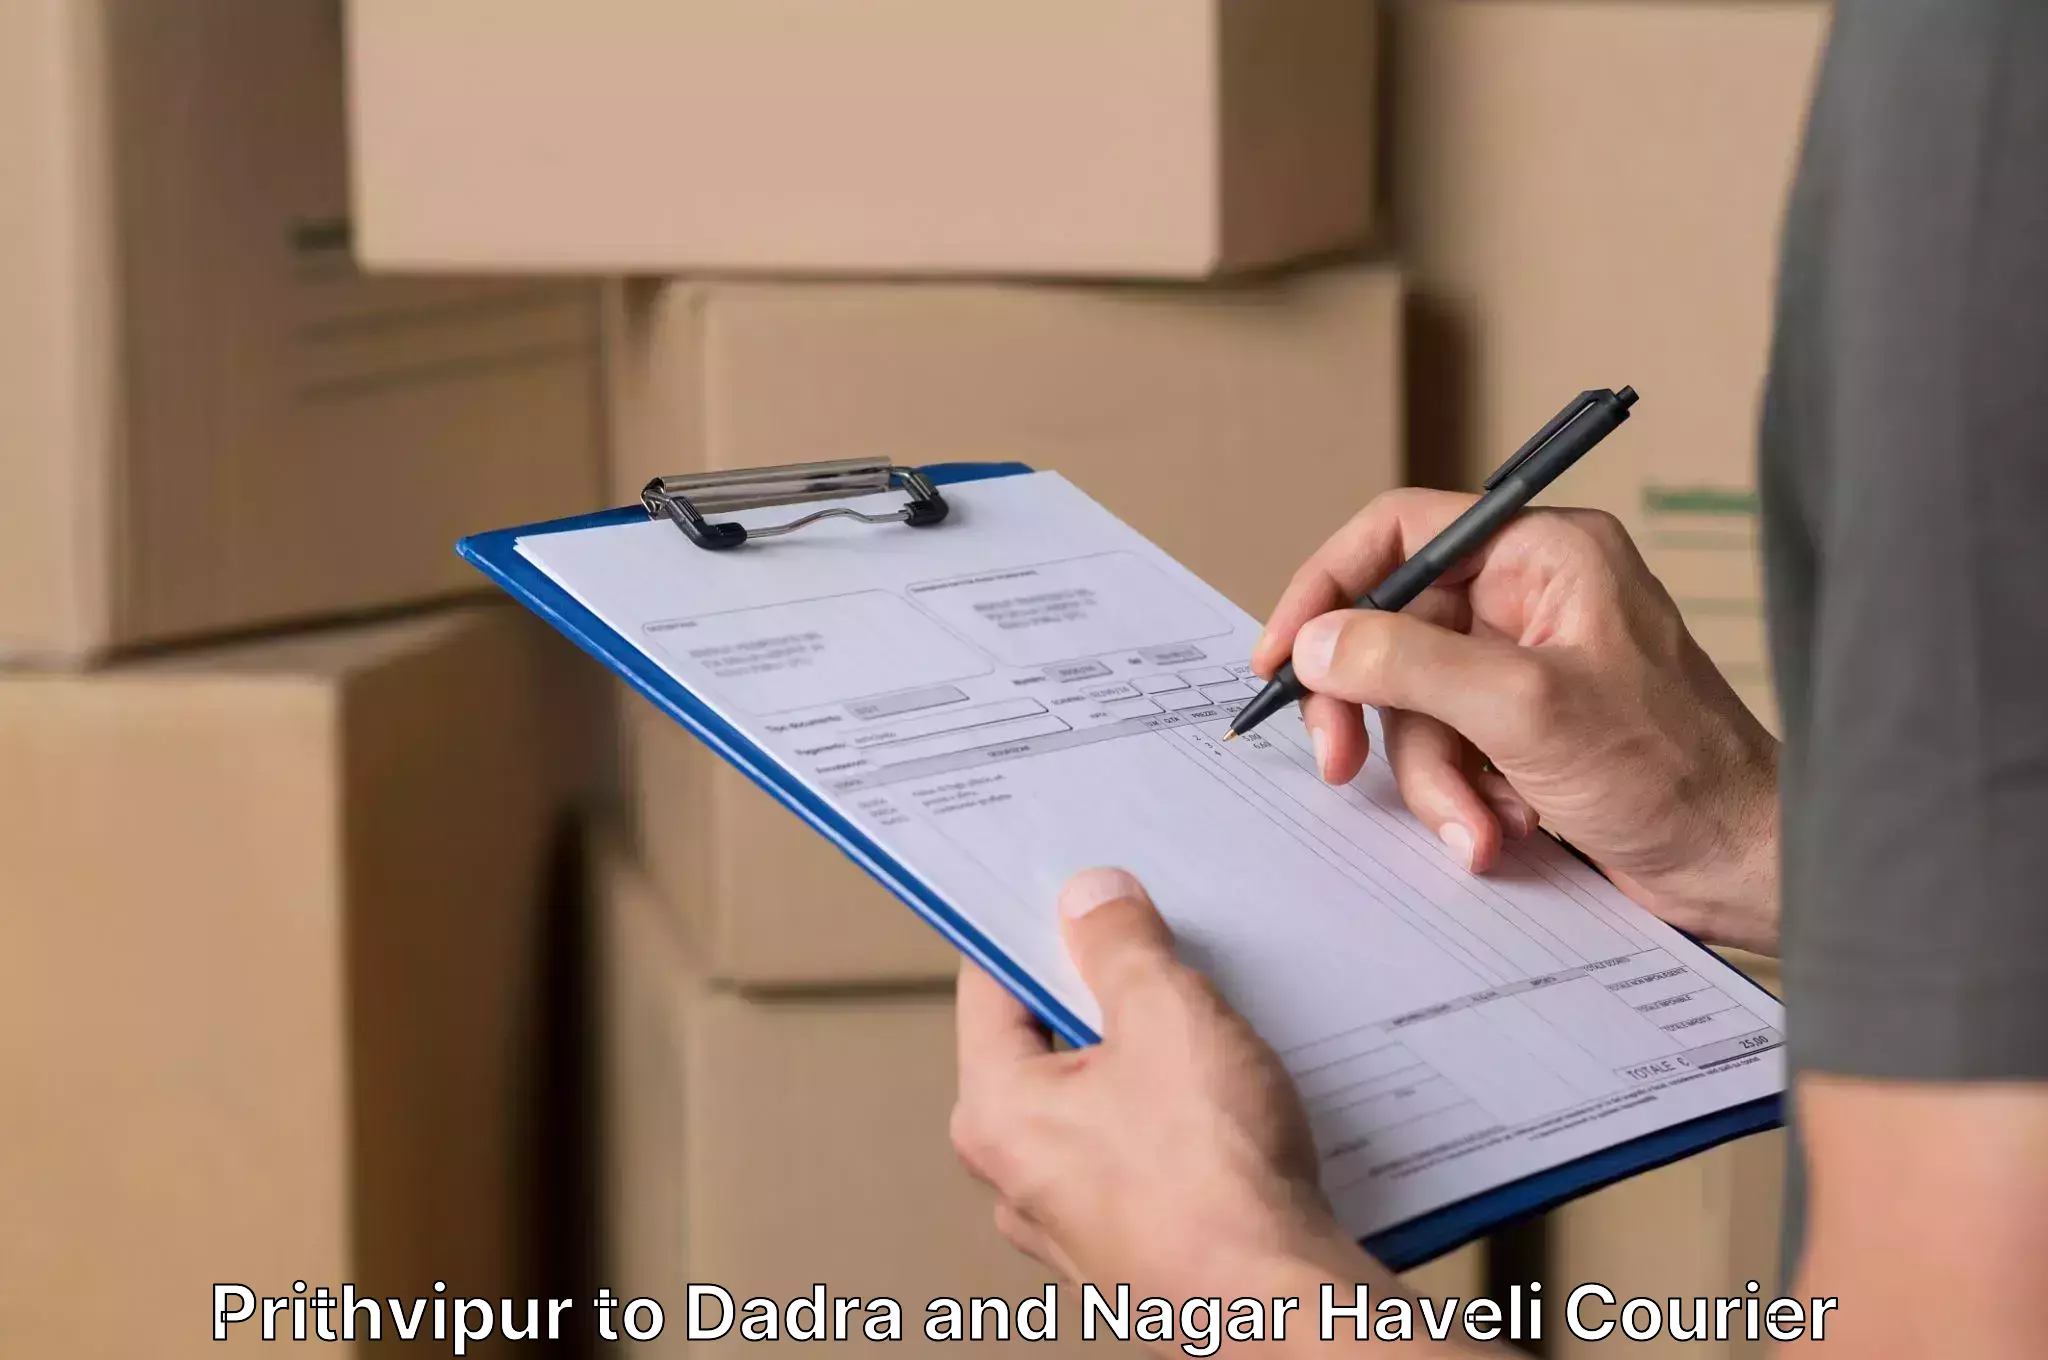 Trusted relocation services Prithvipur to Dadra and Nagar Haveli